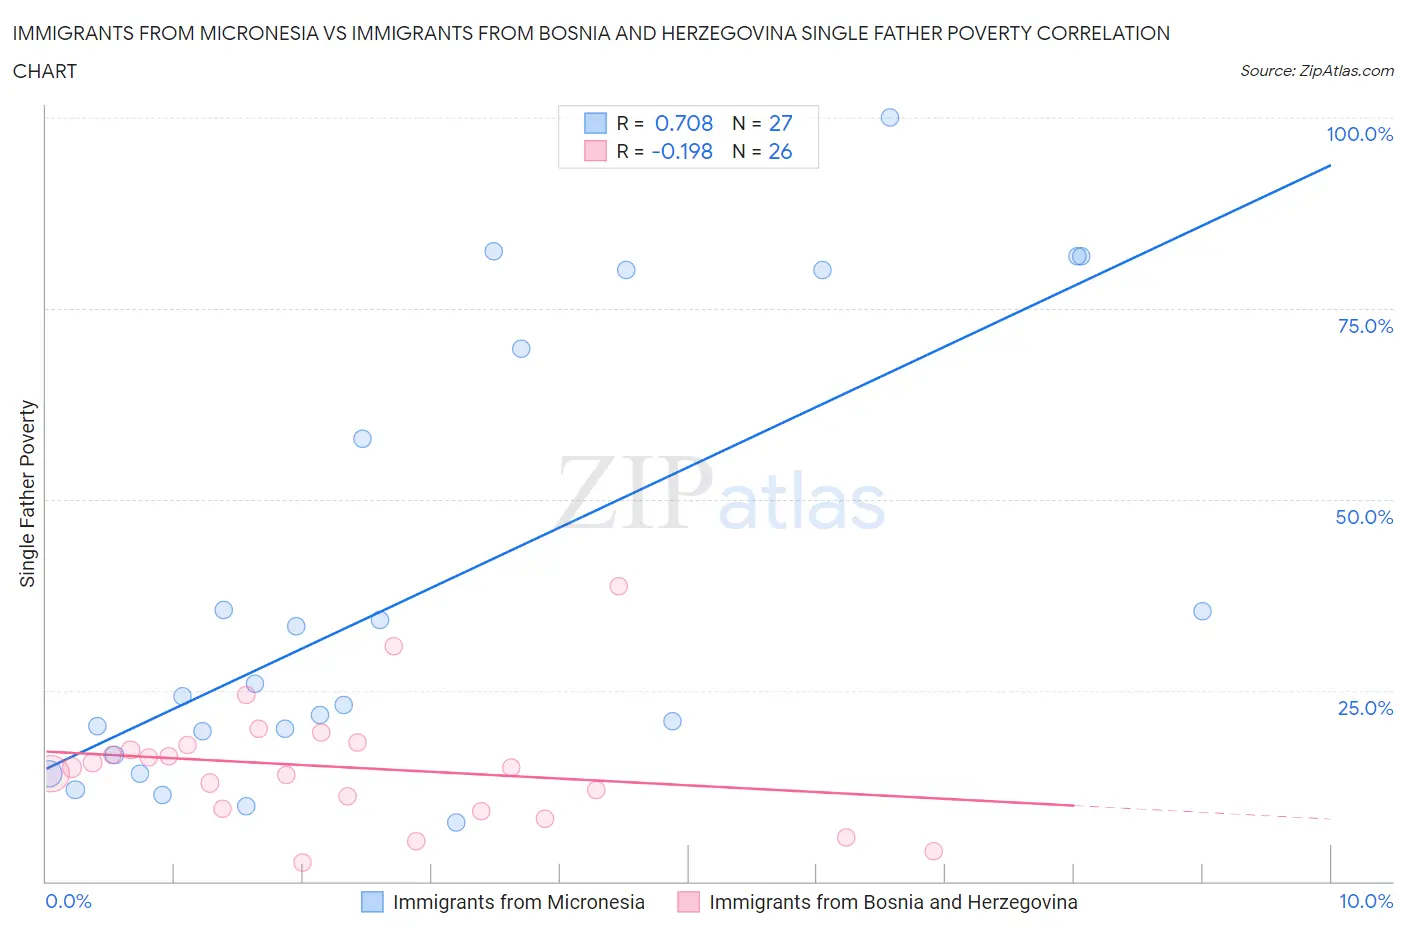 Immigrants from Micronesia vs Immigrants from Bosnia and Herzegovina Single Father Poverty